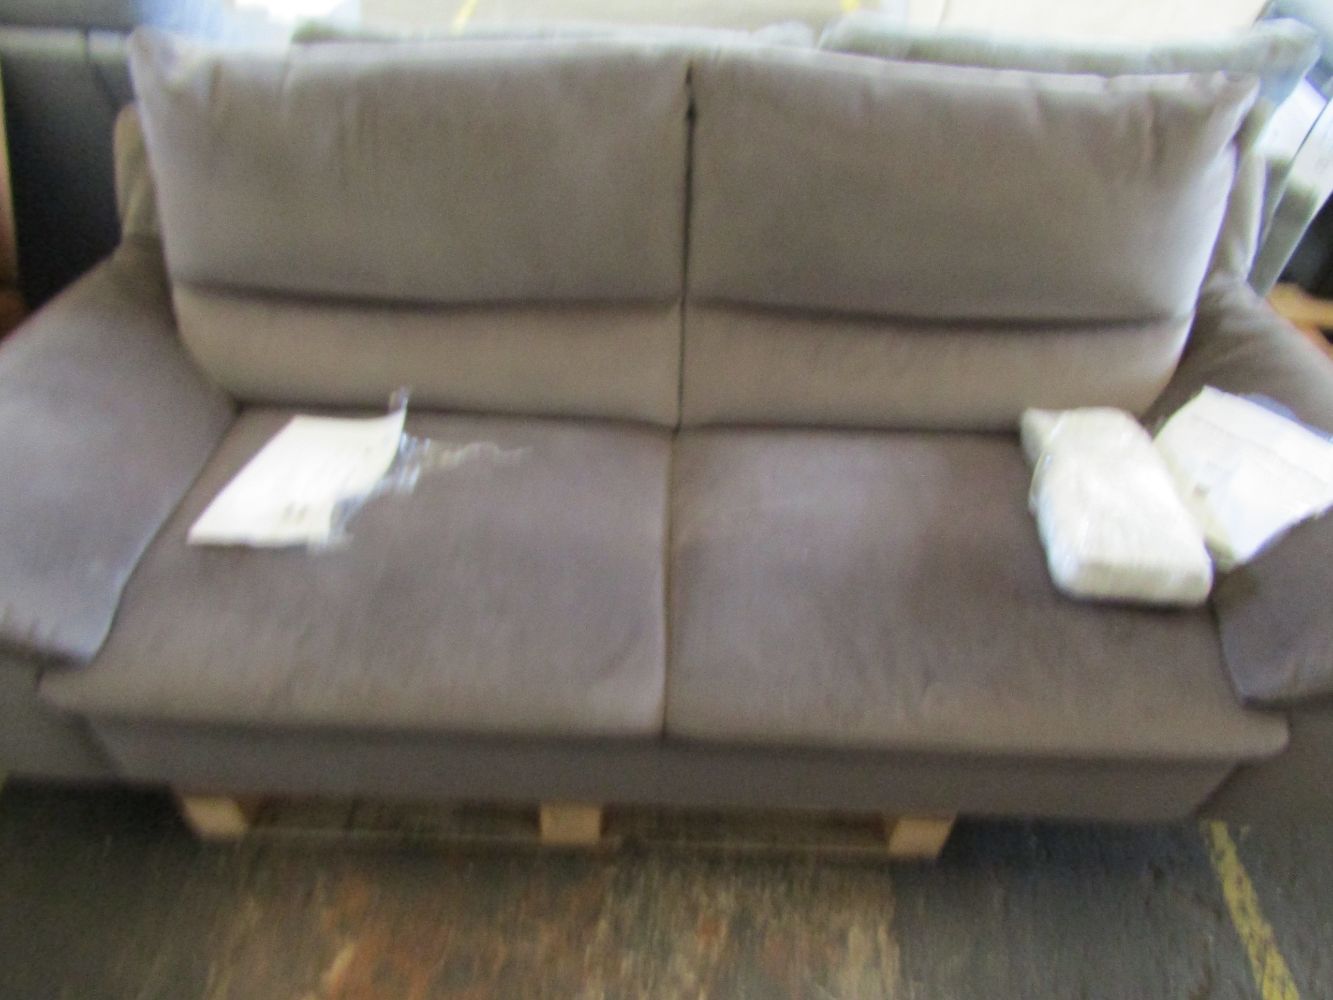 Low Starting Bids on Sofas and chairs from SCS, Oak Furniture land, Heals and more.